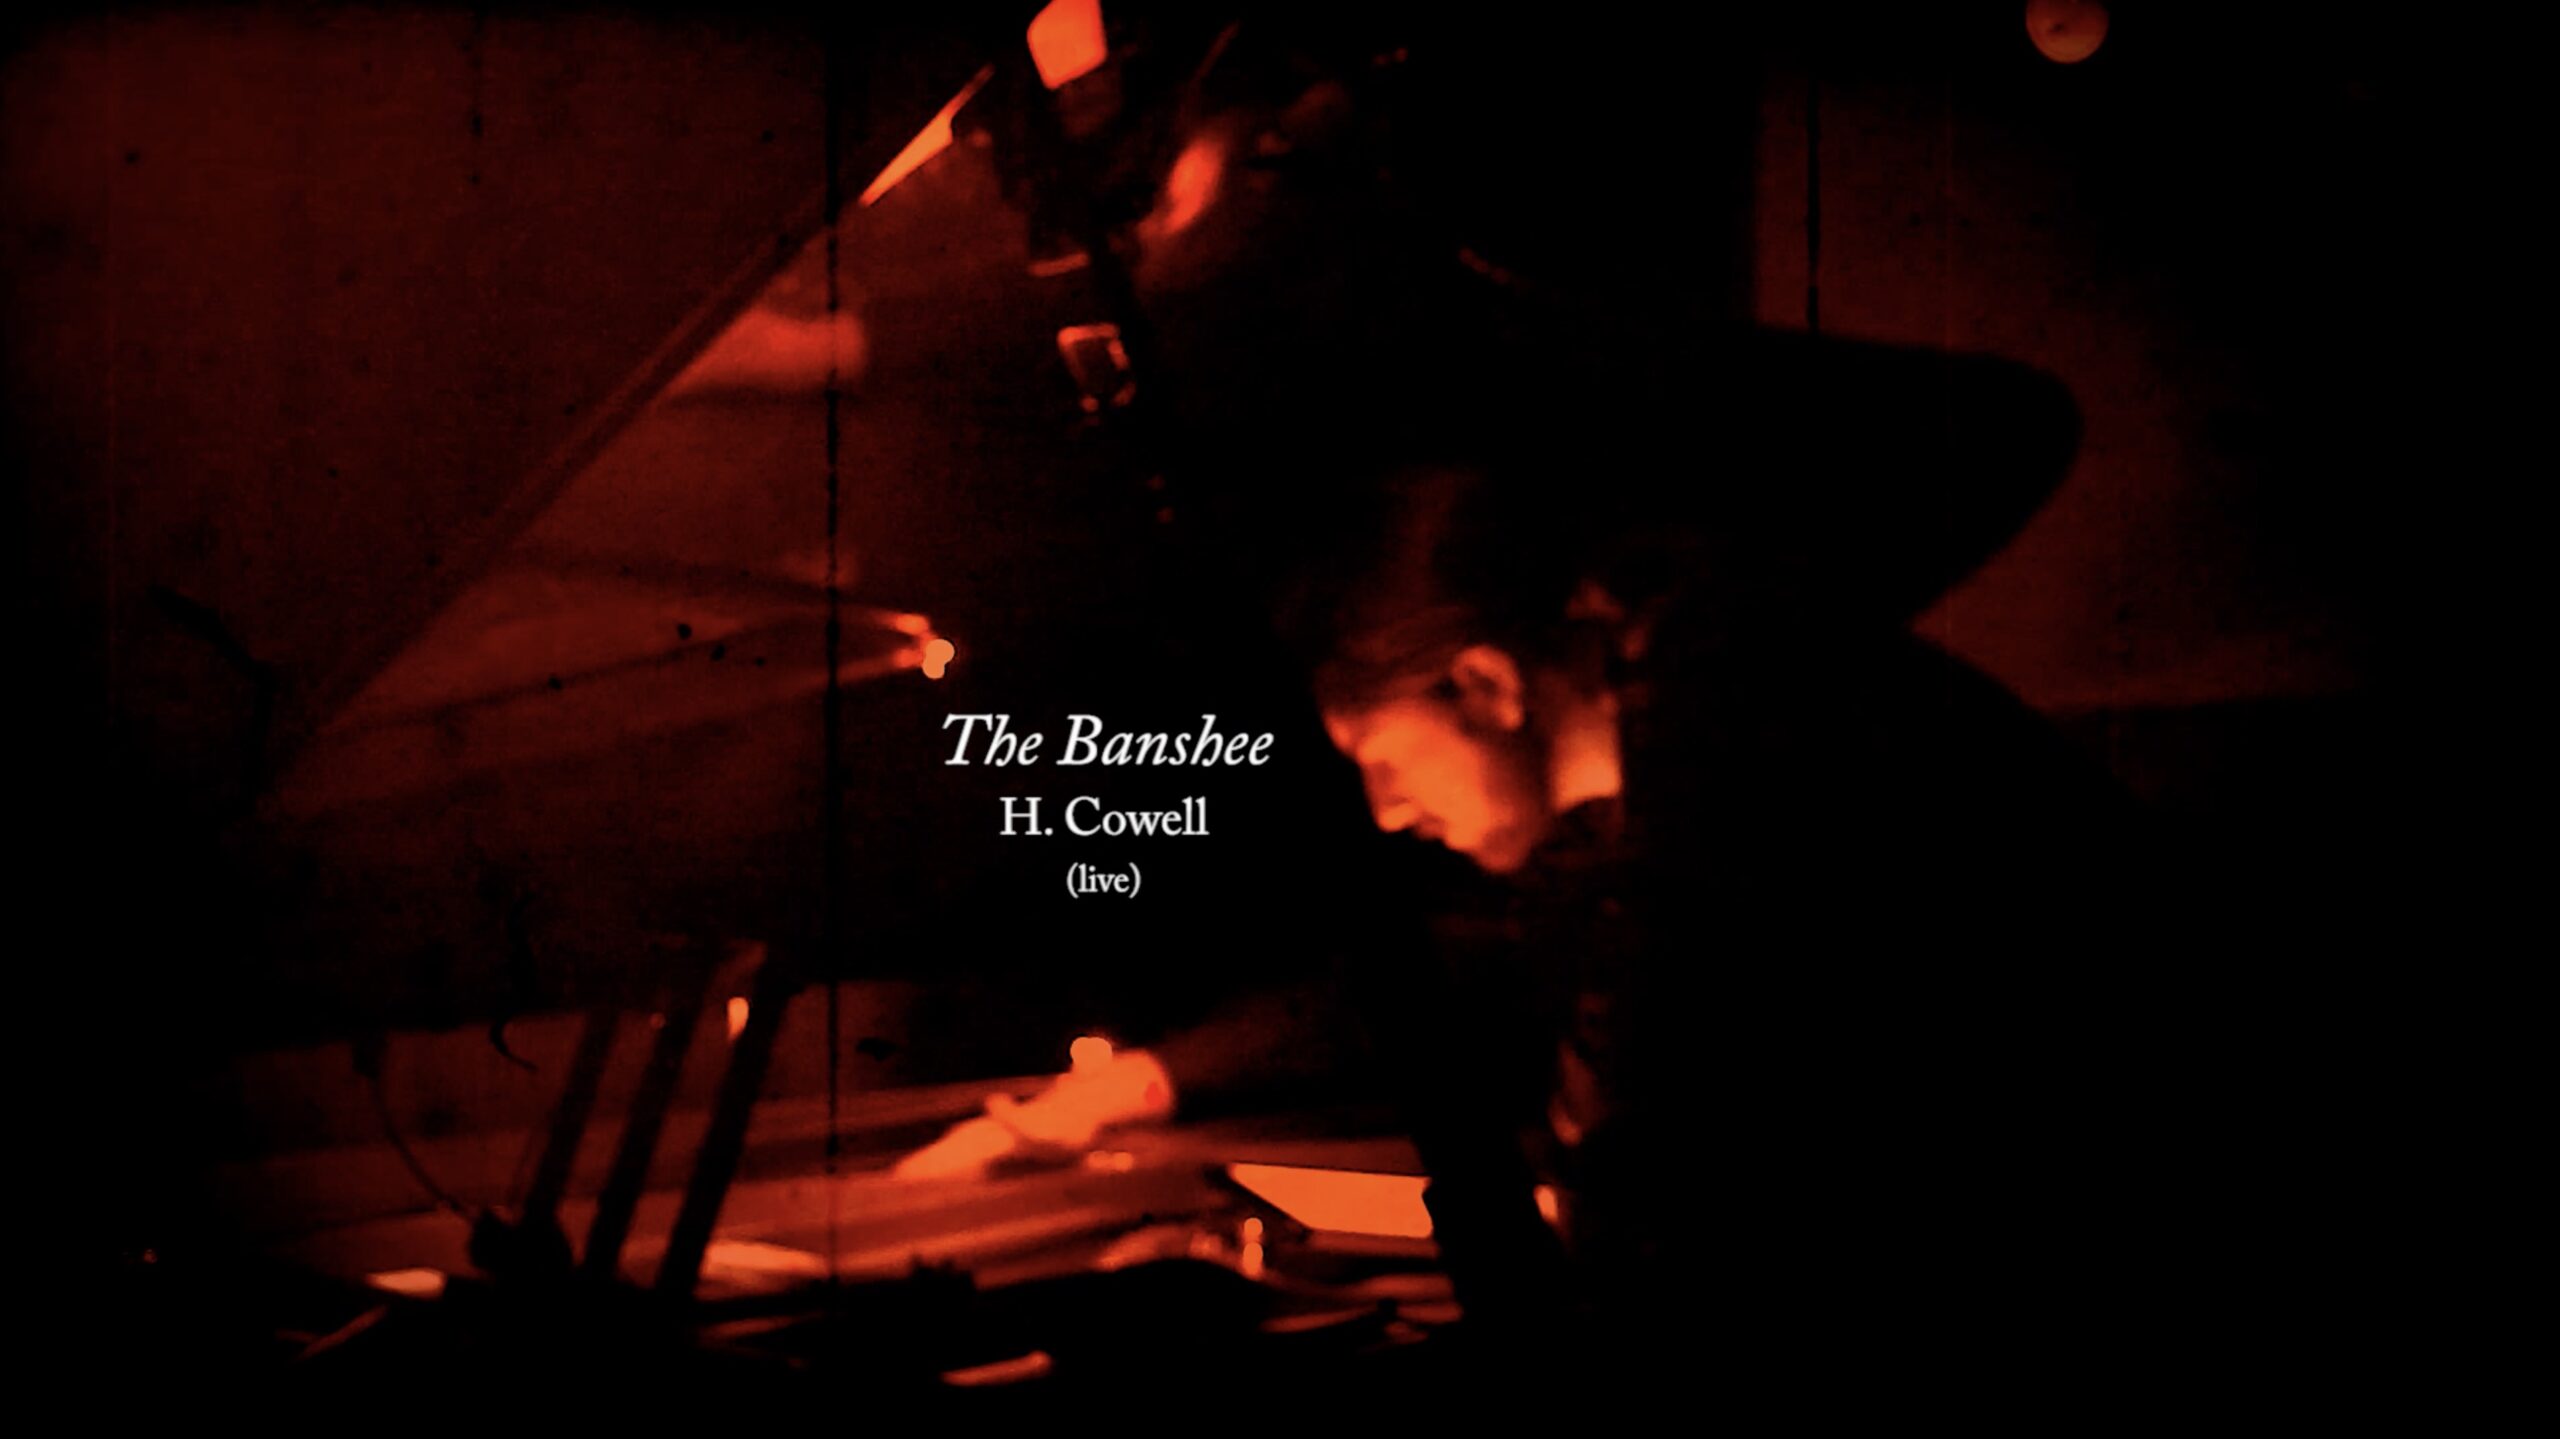 *The Banshee (Henry Cowell, 1925)